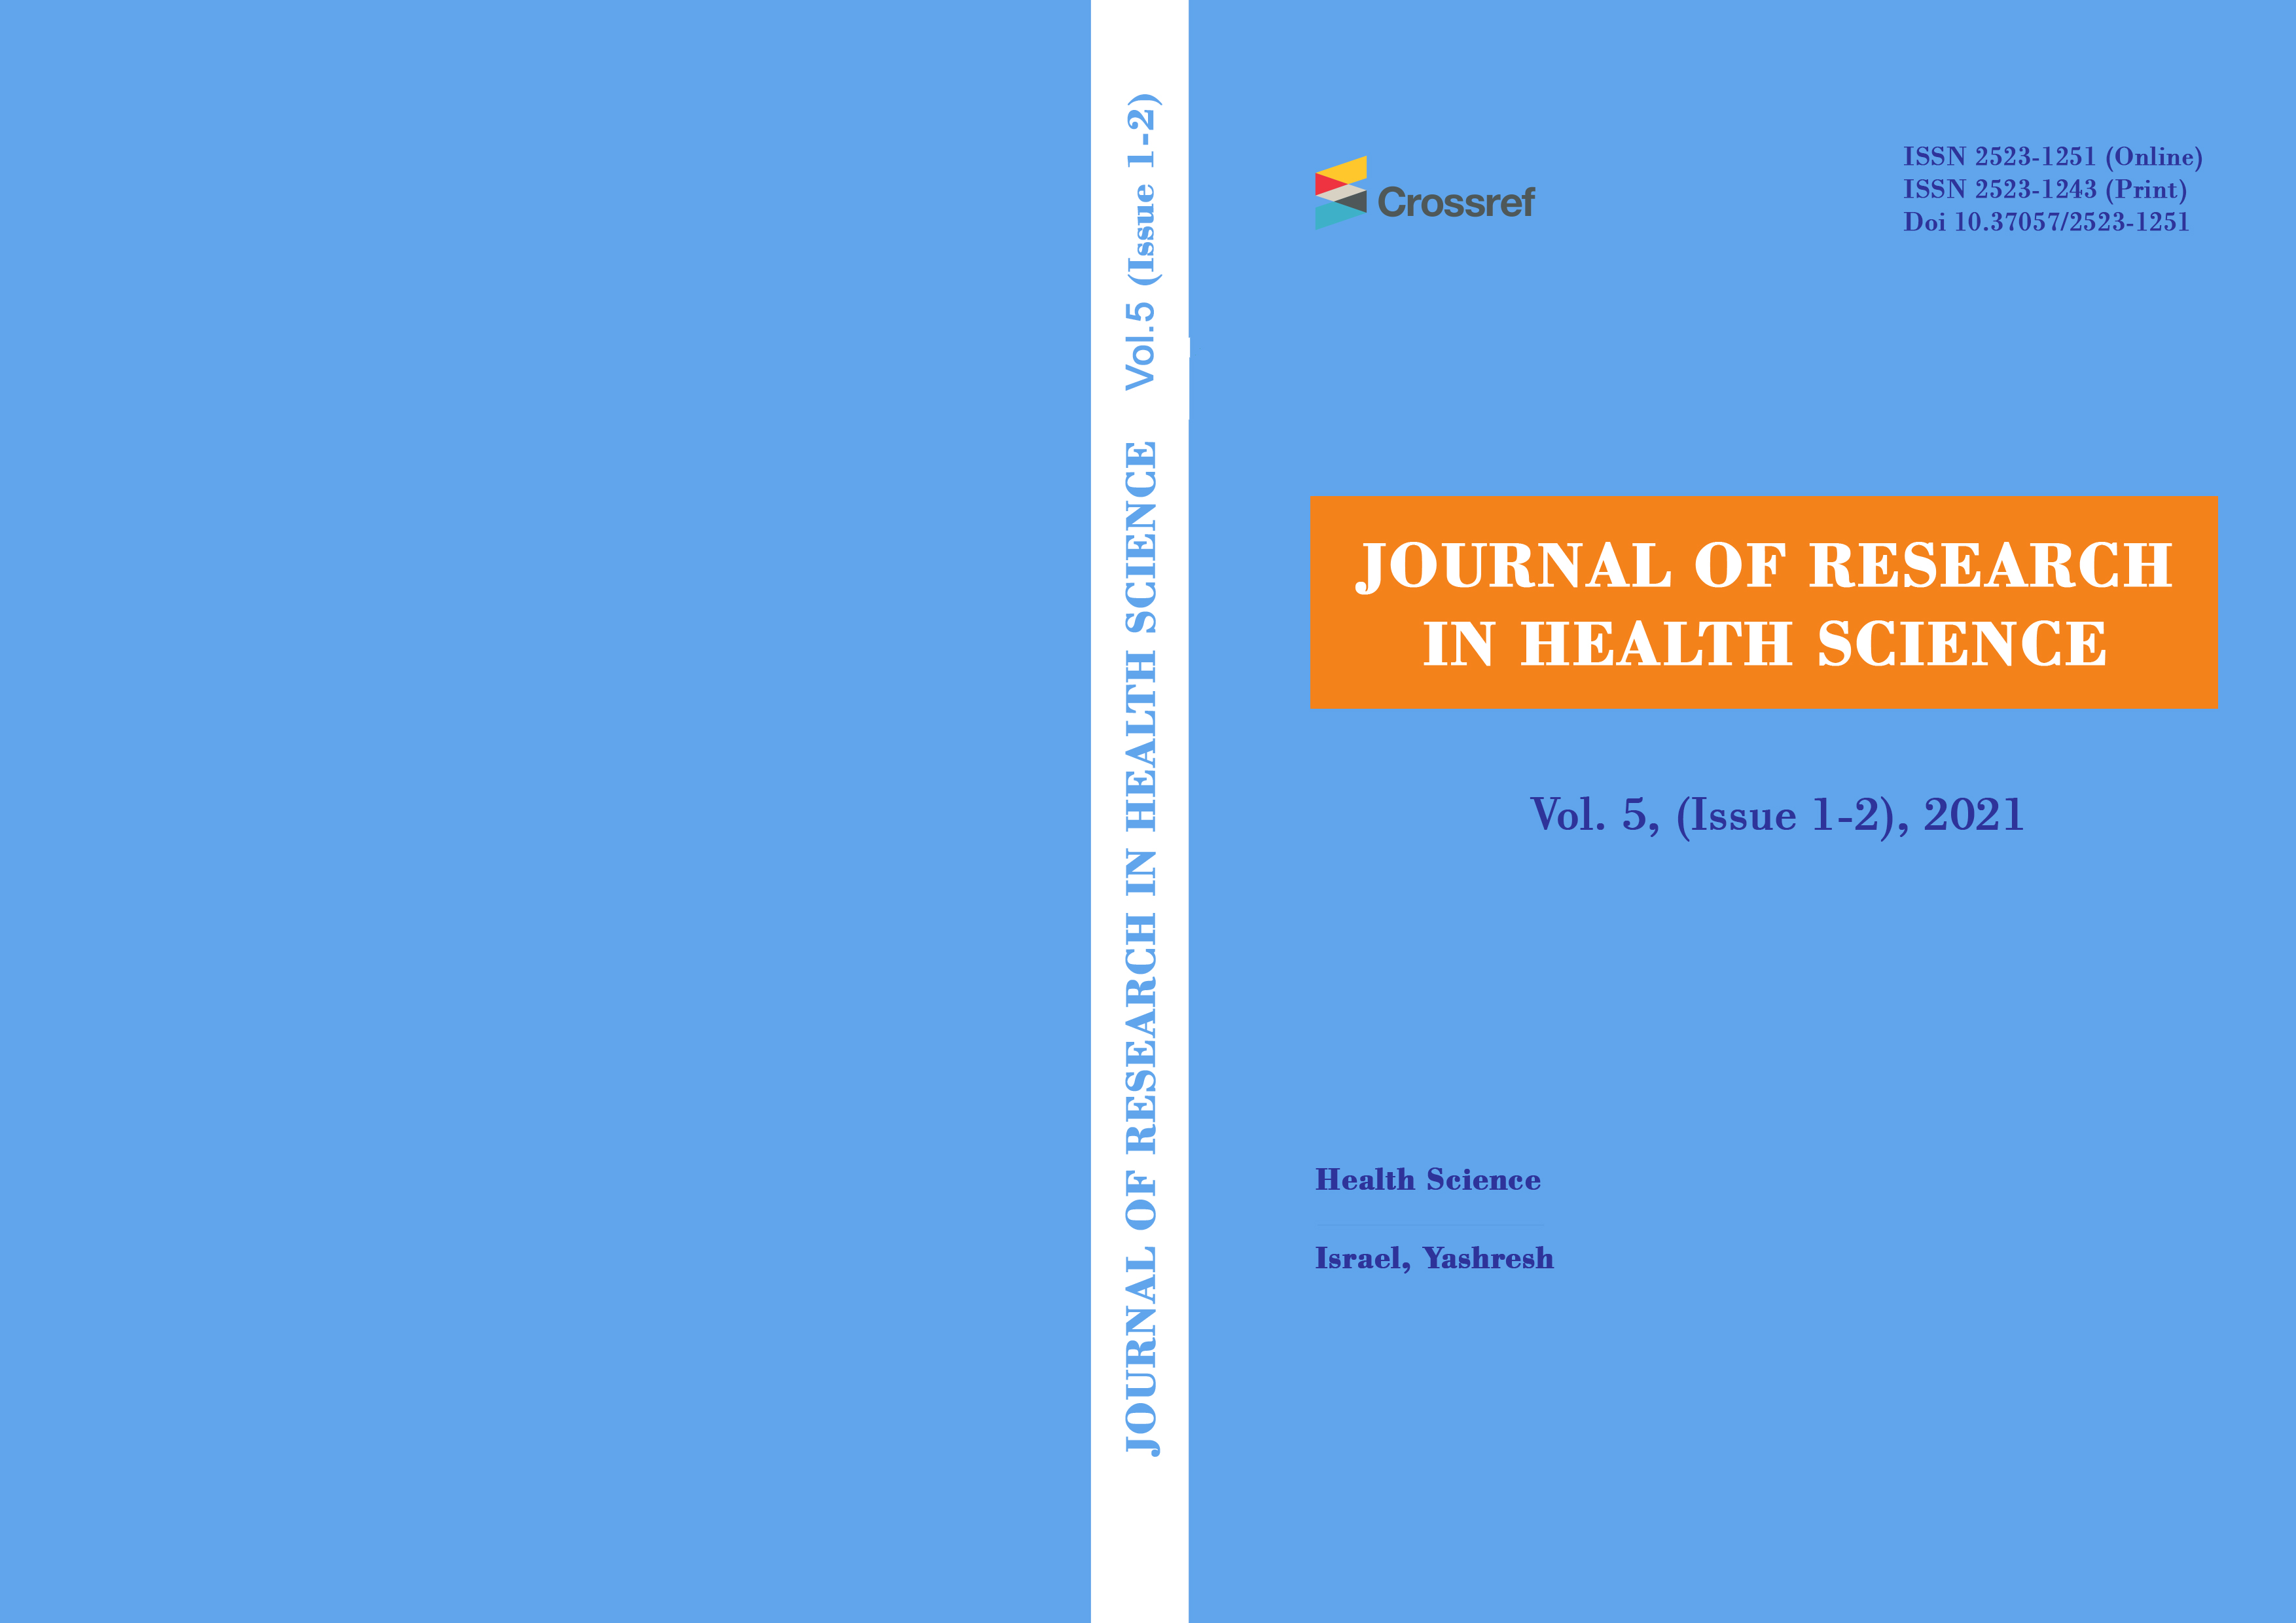 research journal on health care